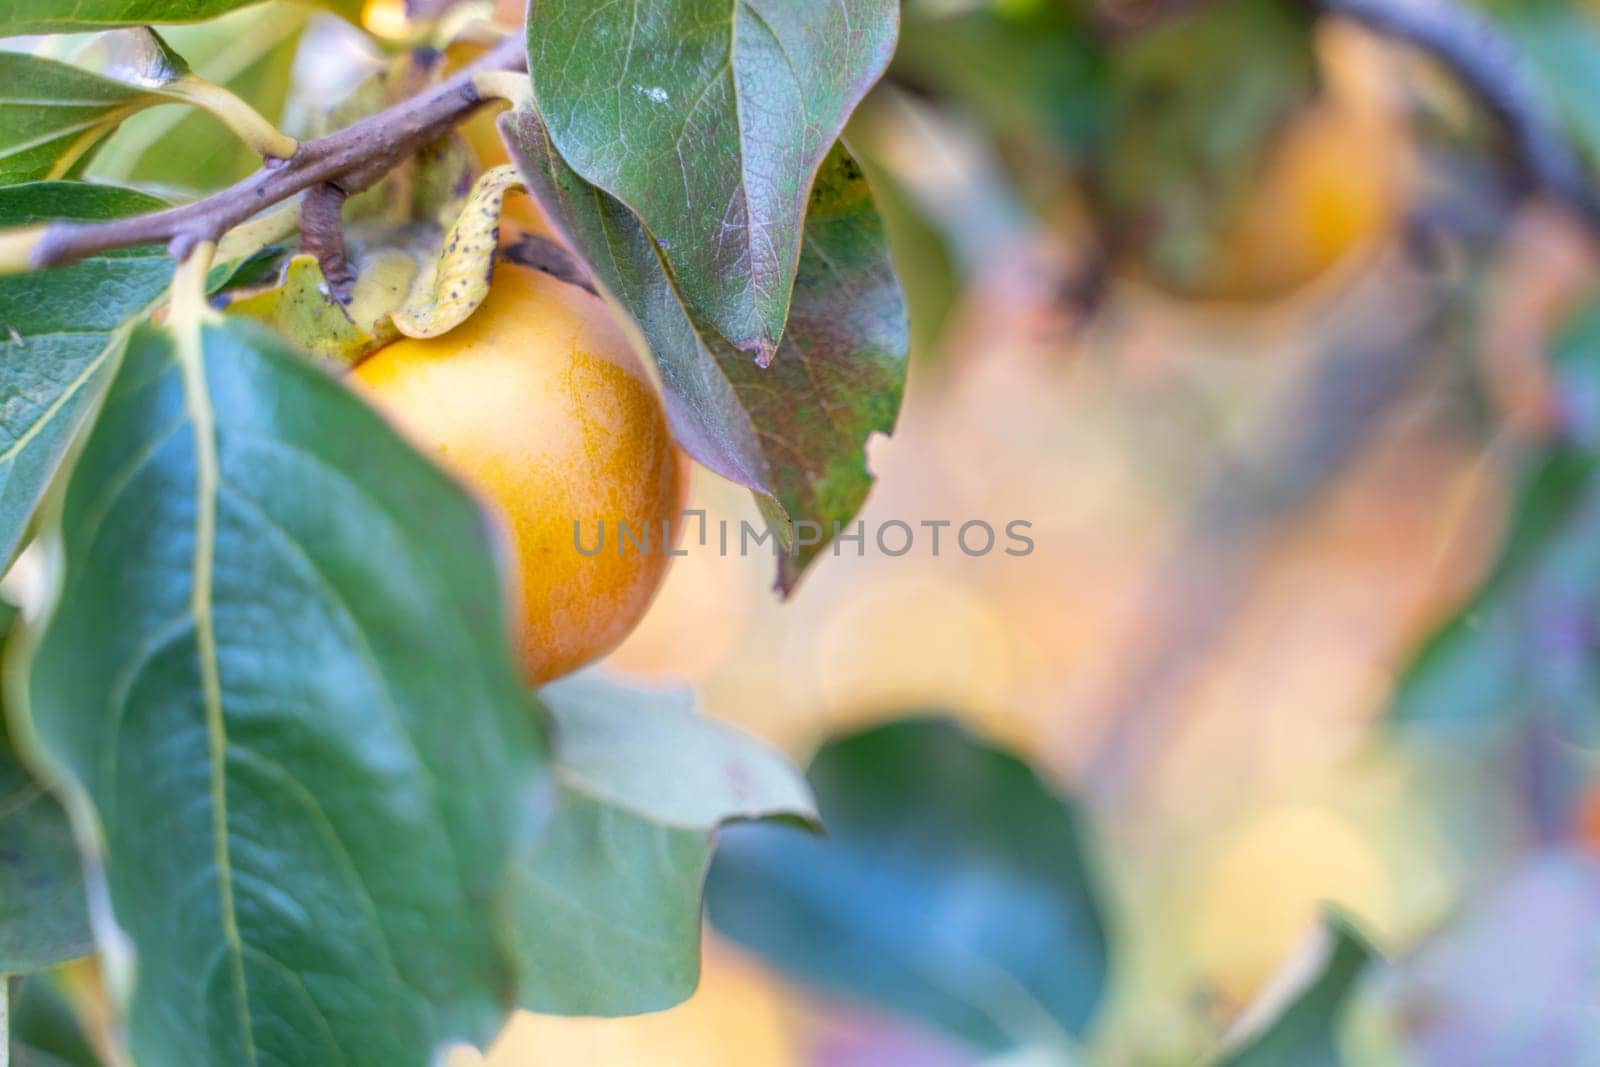 Persimmon ripe fruit garden. Tree branches with ripe persimmon fruits on a sunny day.